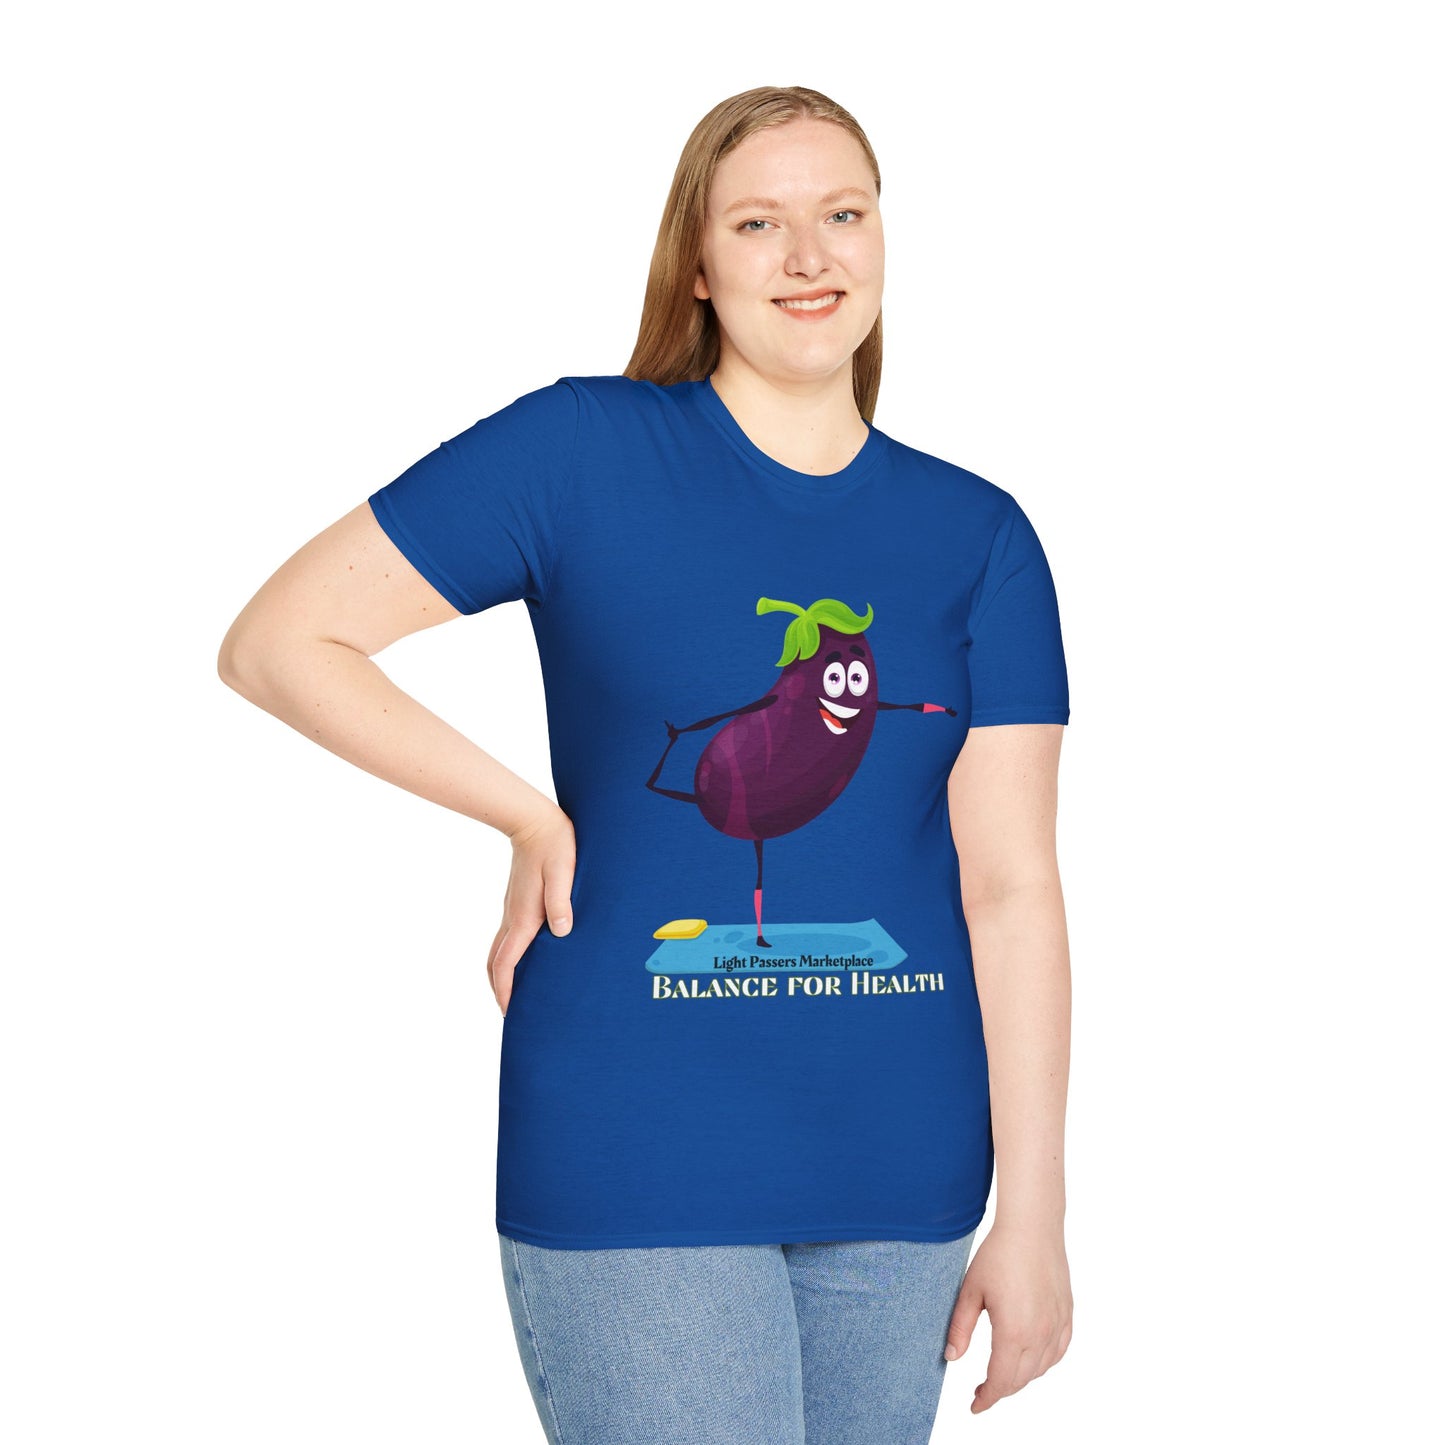 A woman in a blue Eggplant Balance for Health unisex t-shirt, featuring a cartoon eggplant design. Made of soft 100% cotton, with twill tape shoulders for durability and a ribbed collar.